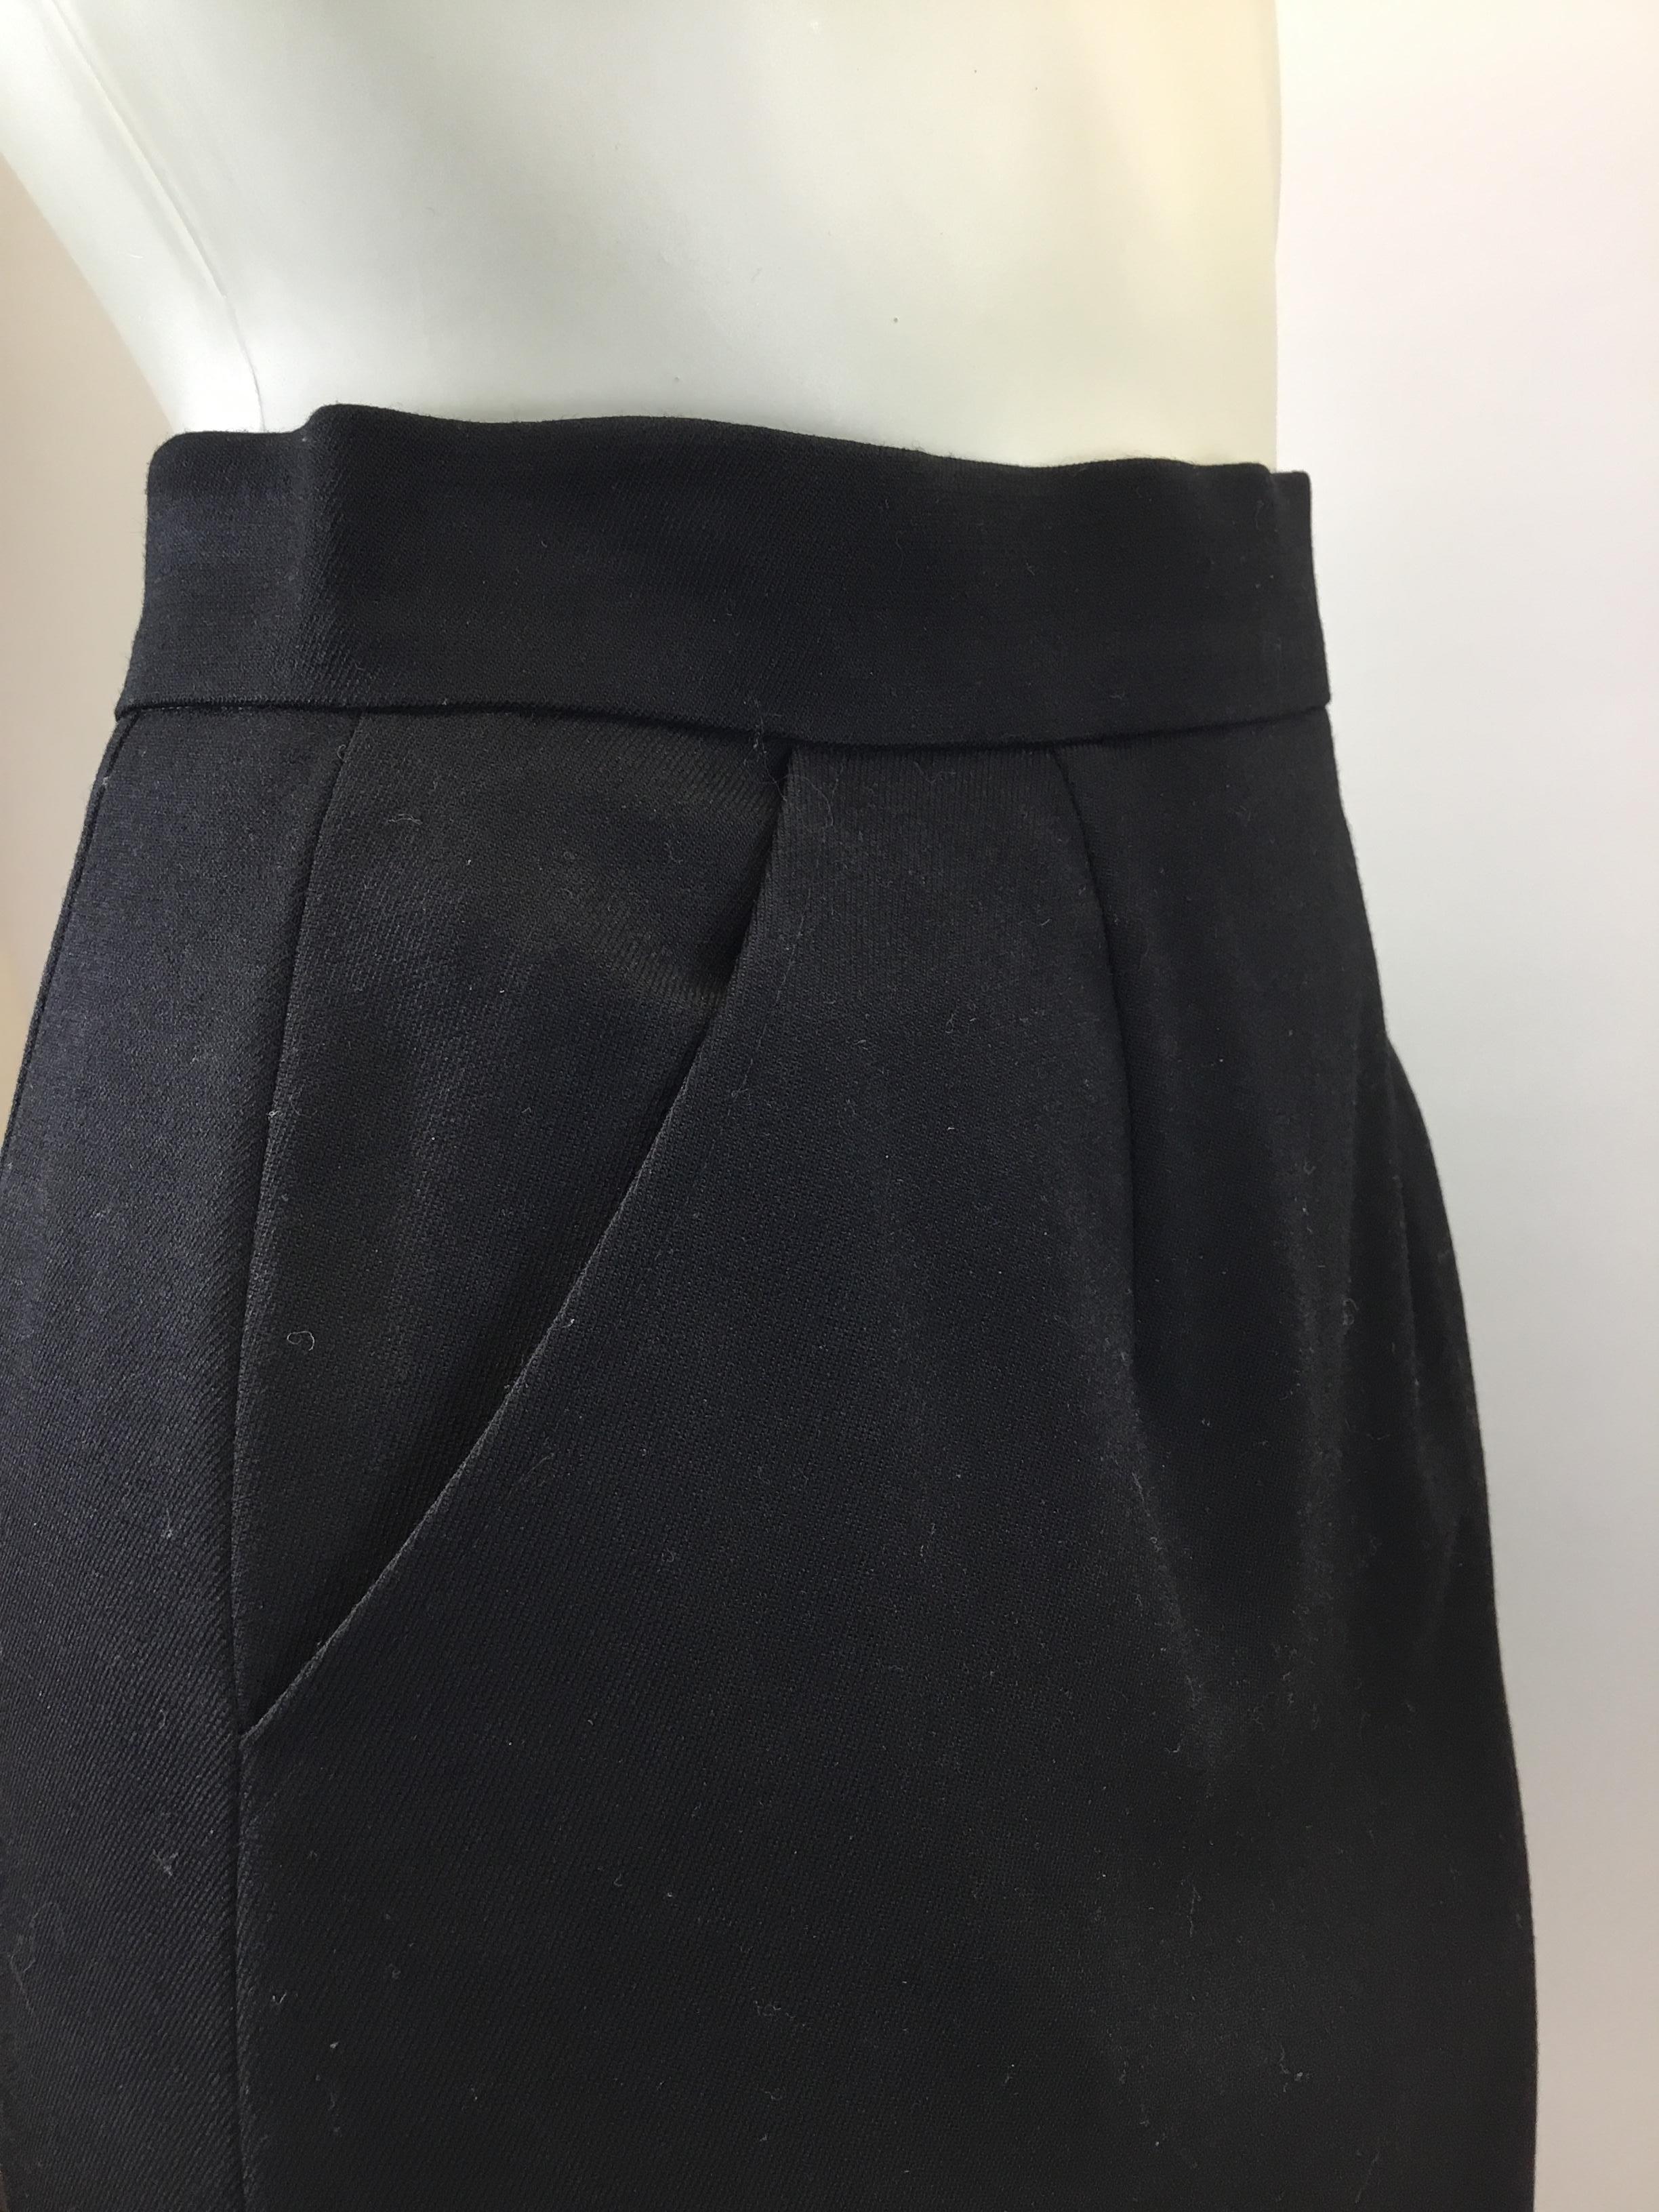 Chanel Black Mid-Length Skirt with Gold Buttons For Sale 2